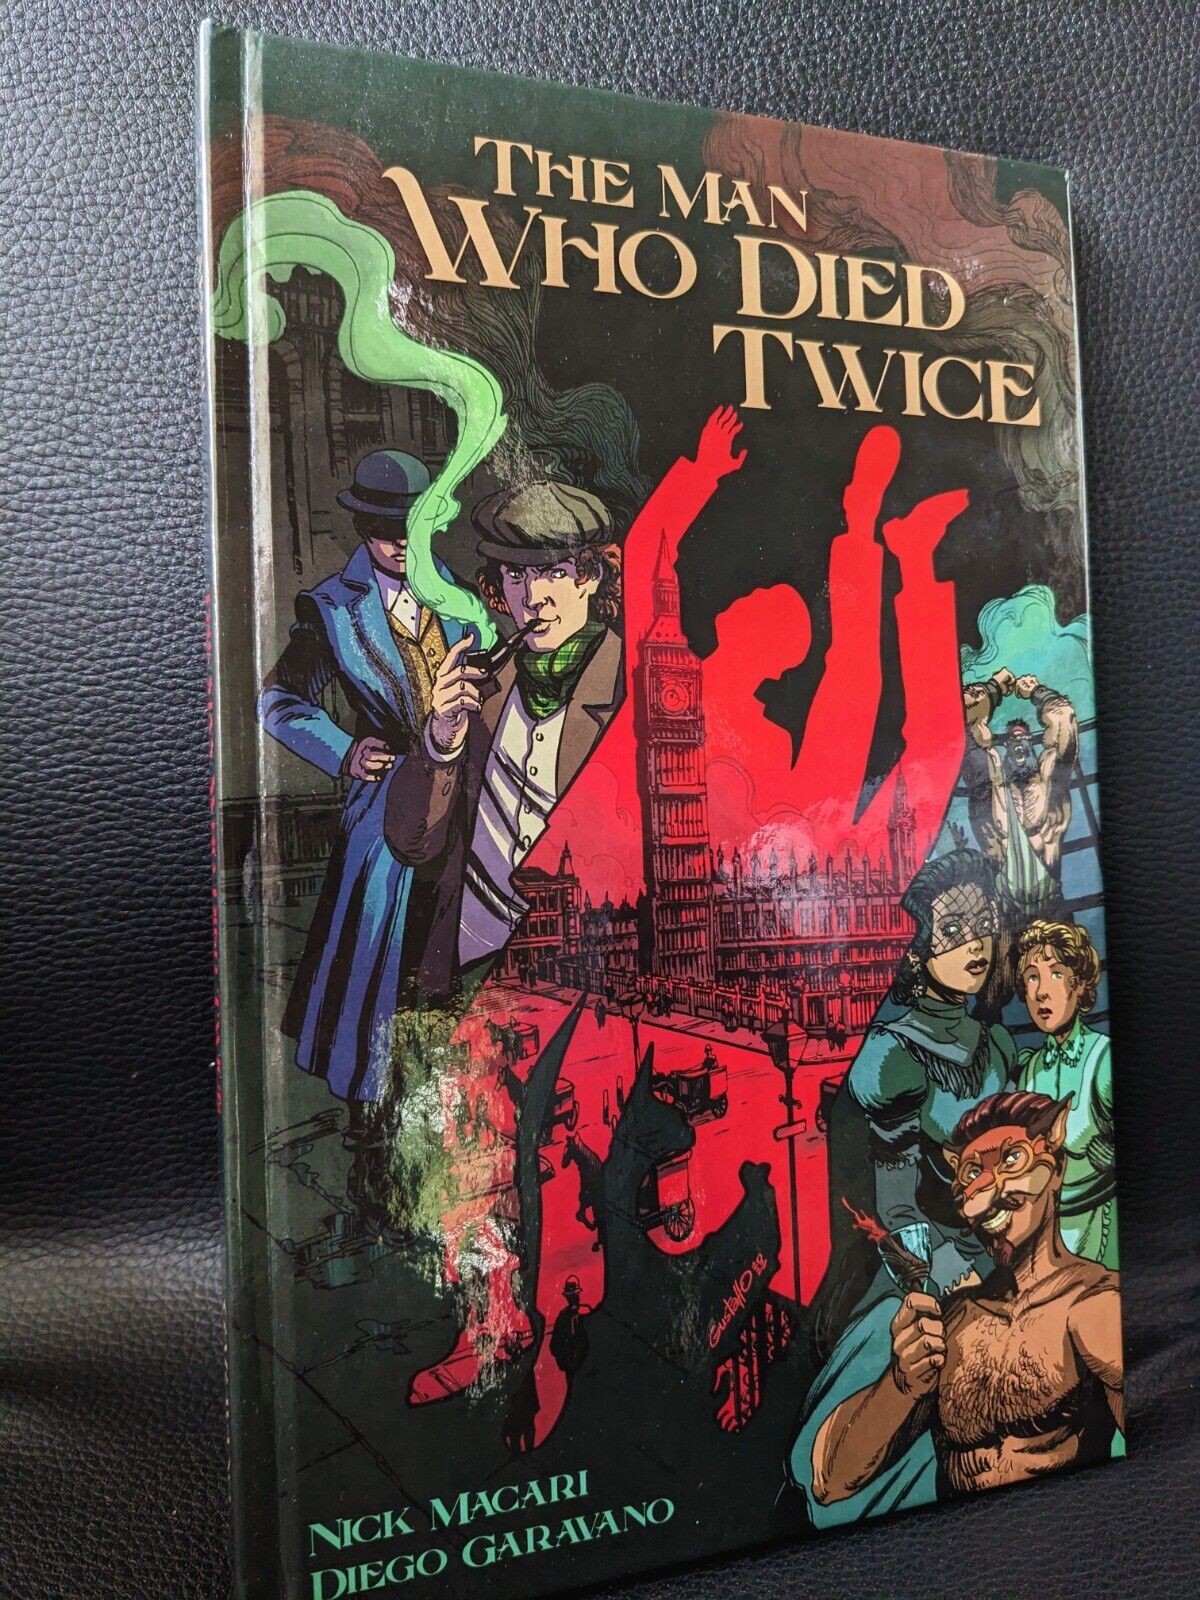 Murder Mystery Graphic Novel: The Man Who Died Twice(Standard Cover)